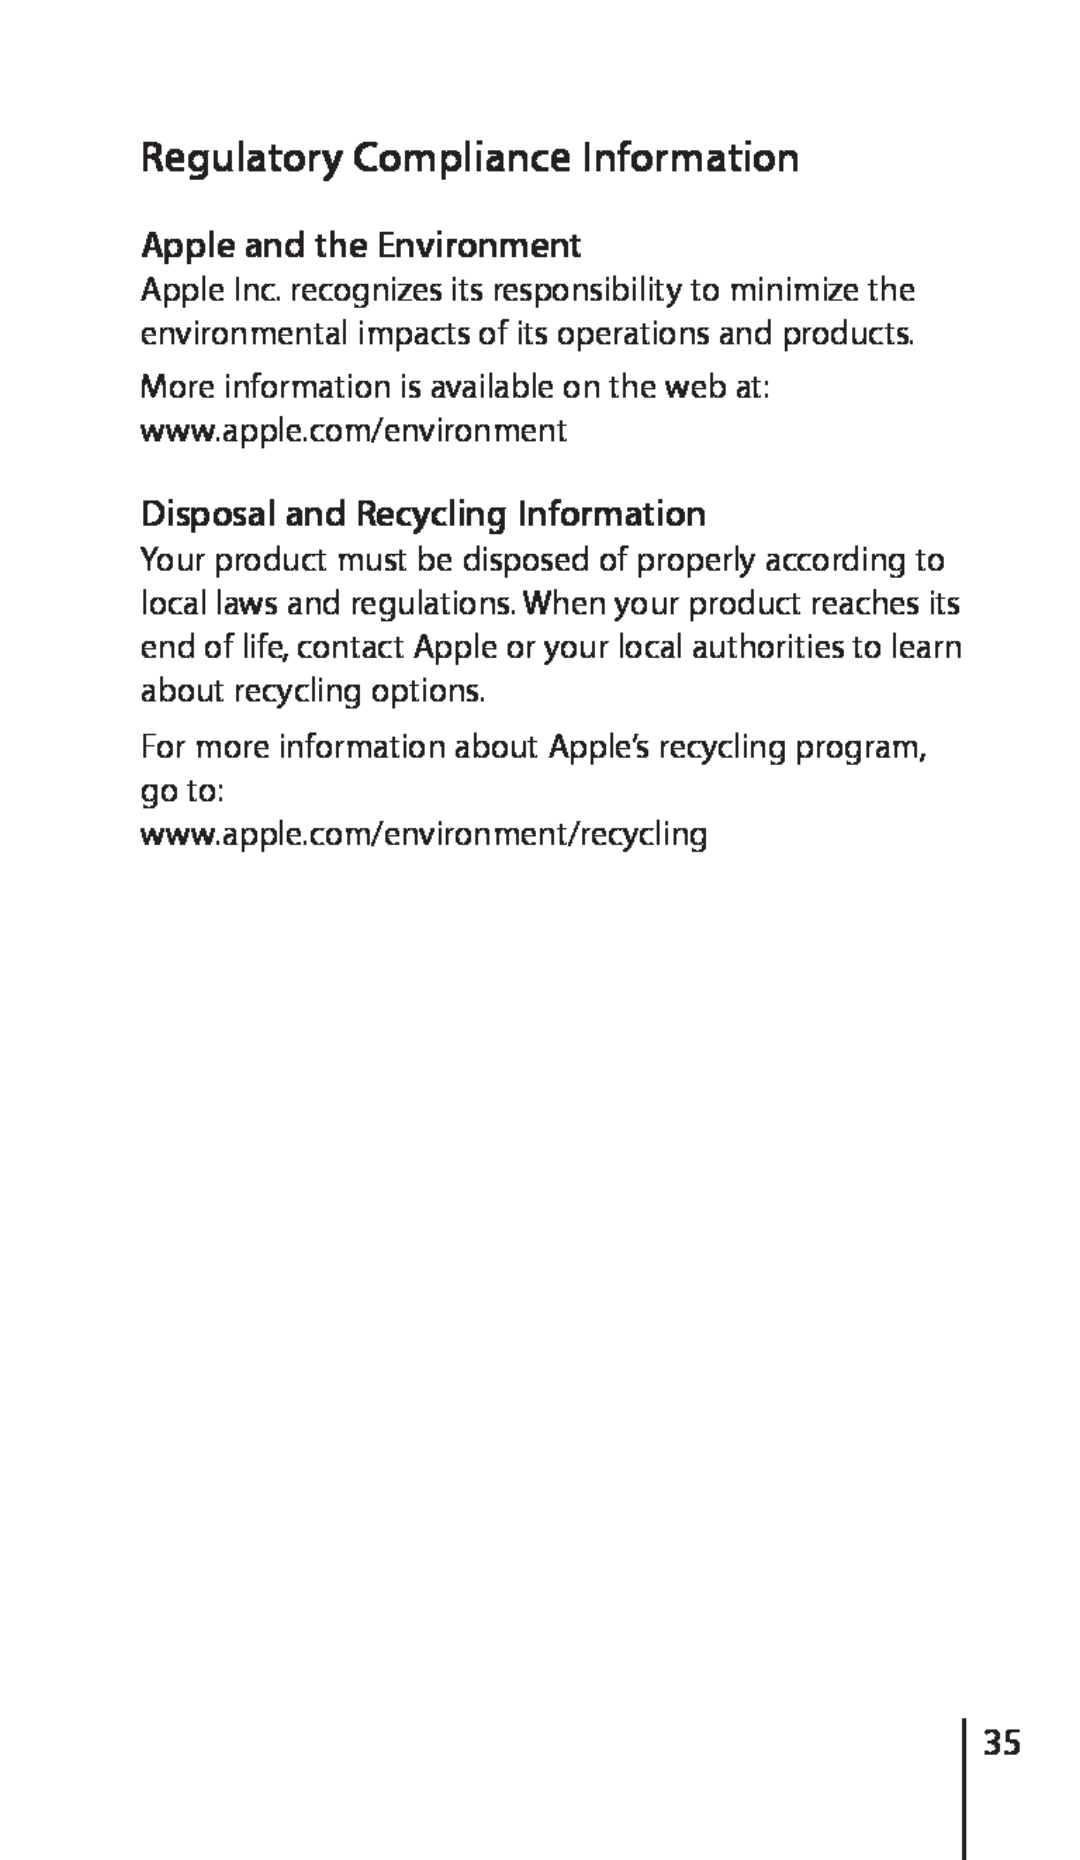 Apple ZM034-4956-A manual Apple and the Environment, Disposal and Recycling Information, Regulatory Compliance Information 